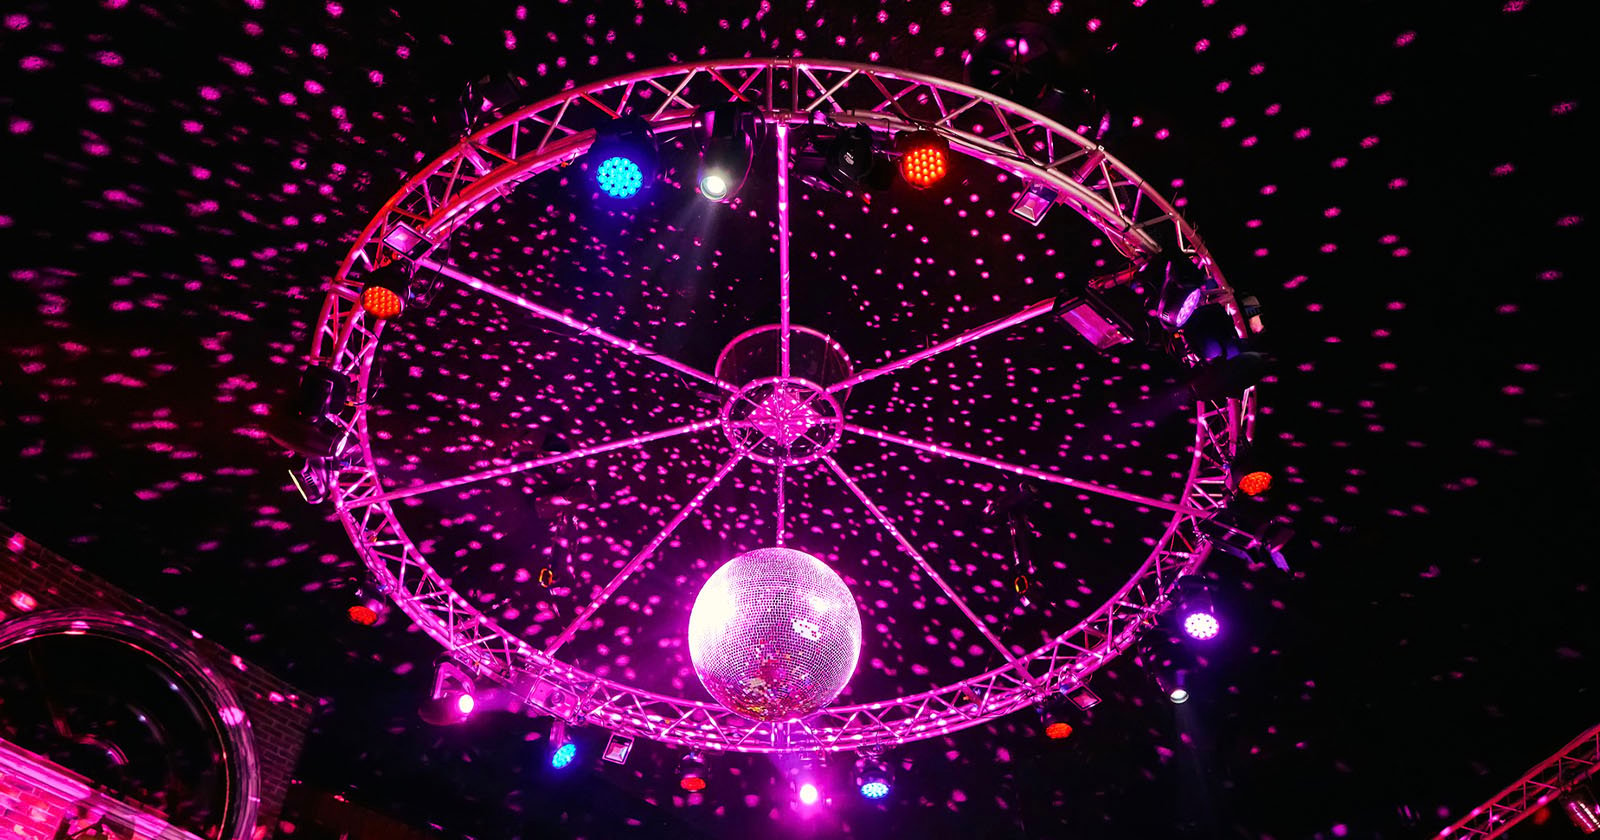 Astronomers Want More Disco Balls to be Installed in Observatories